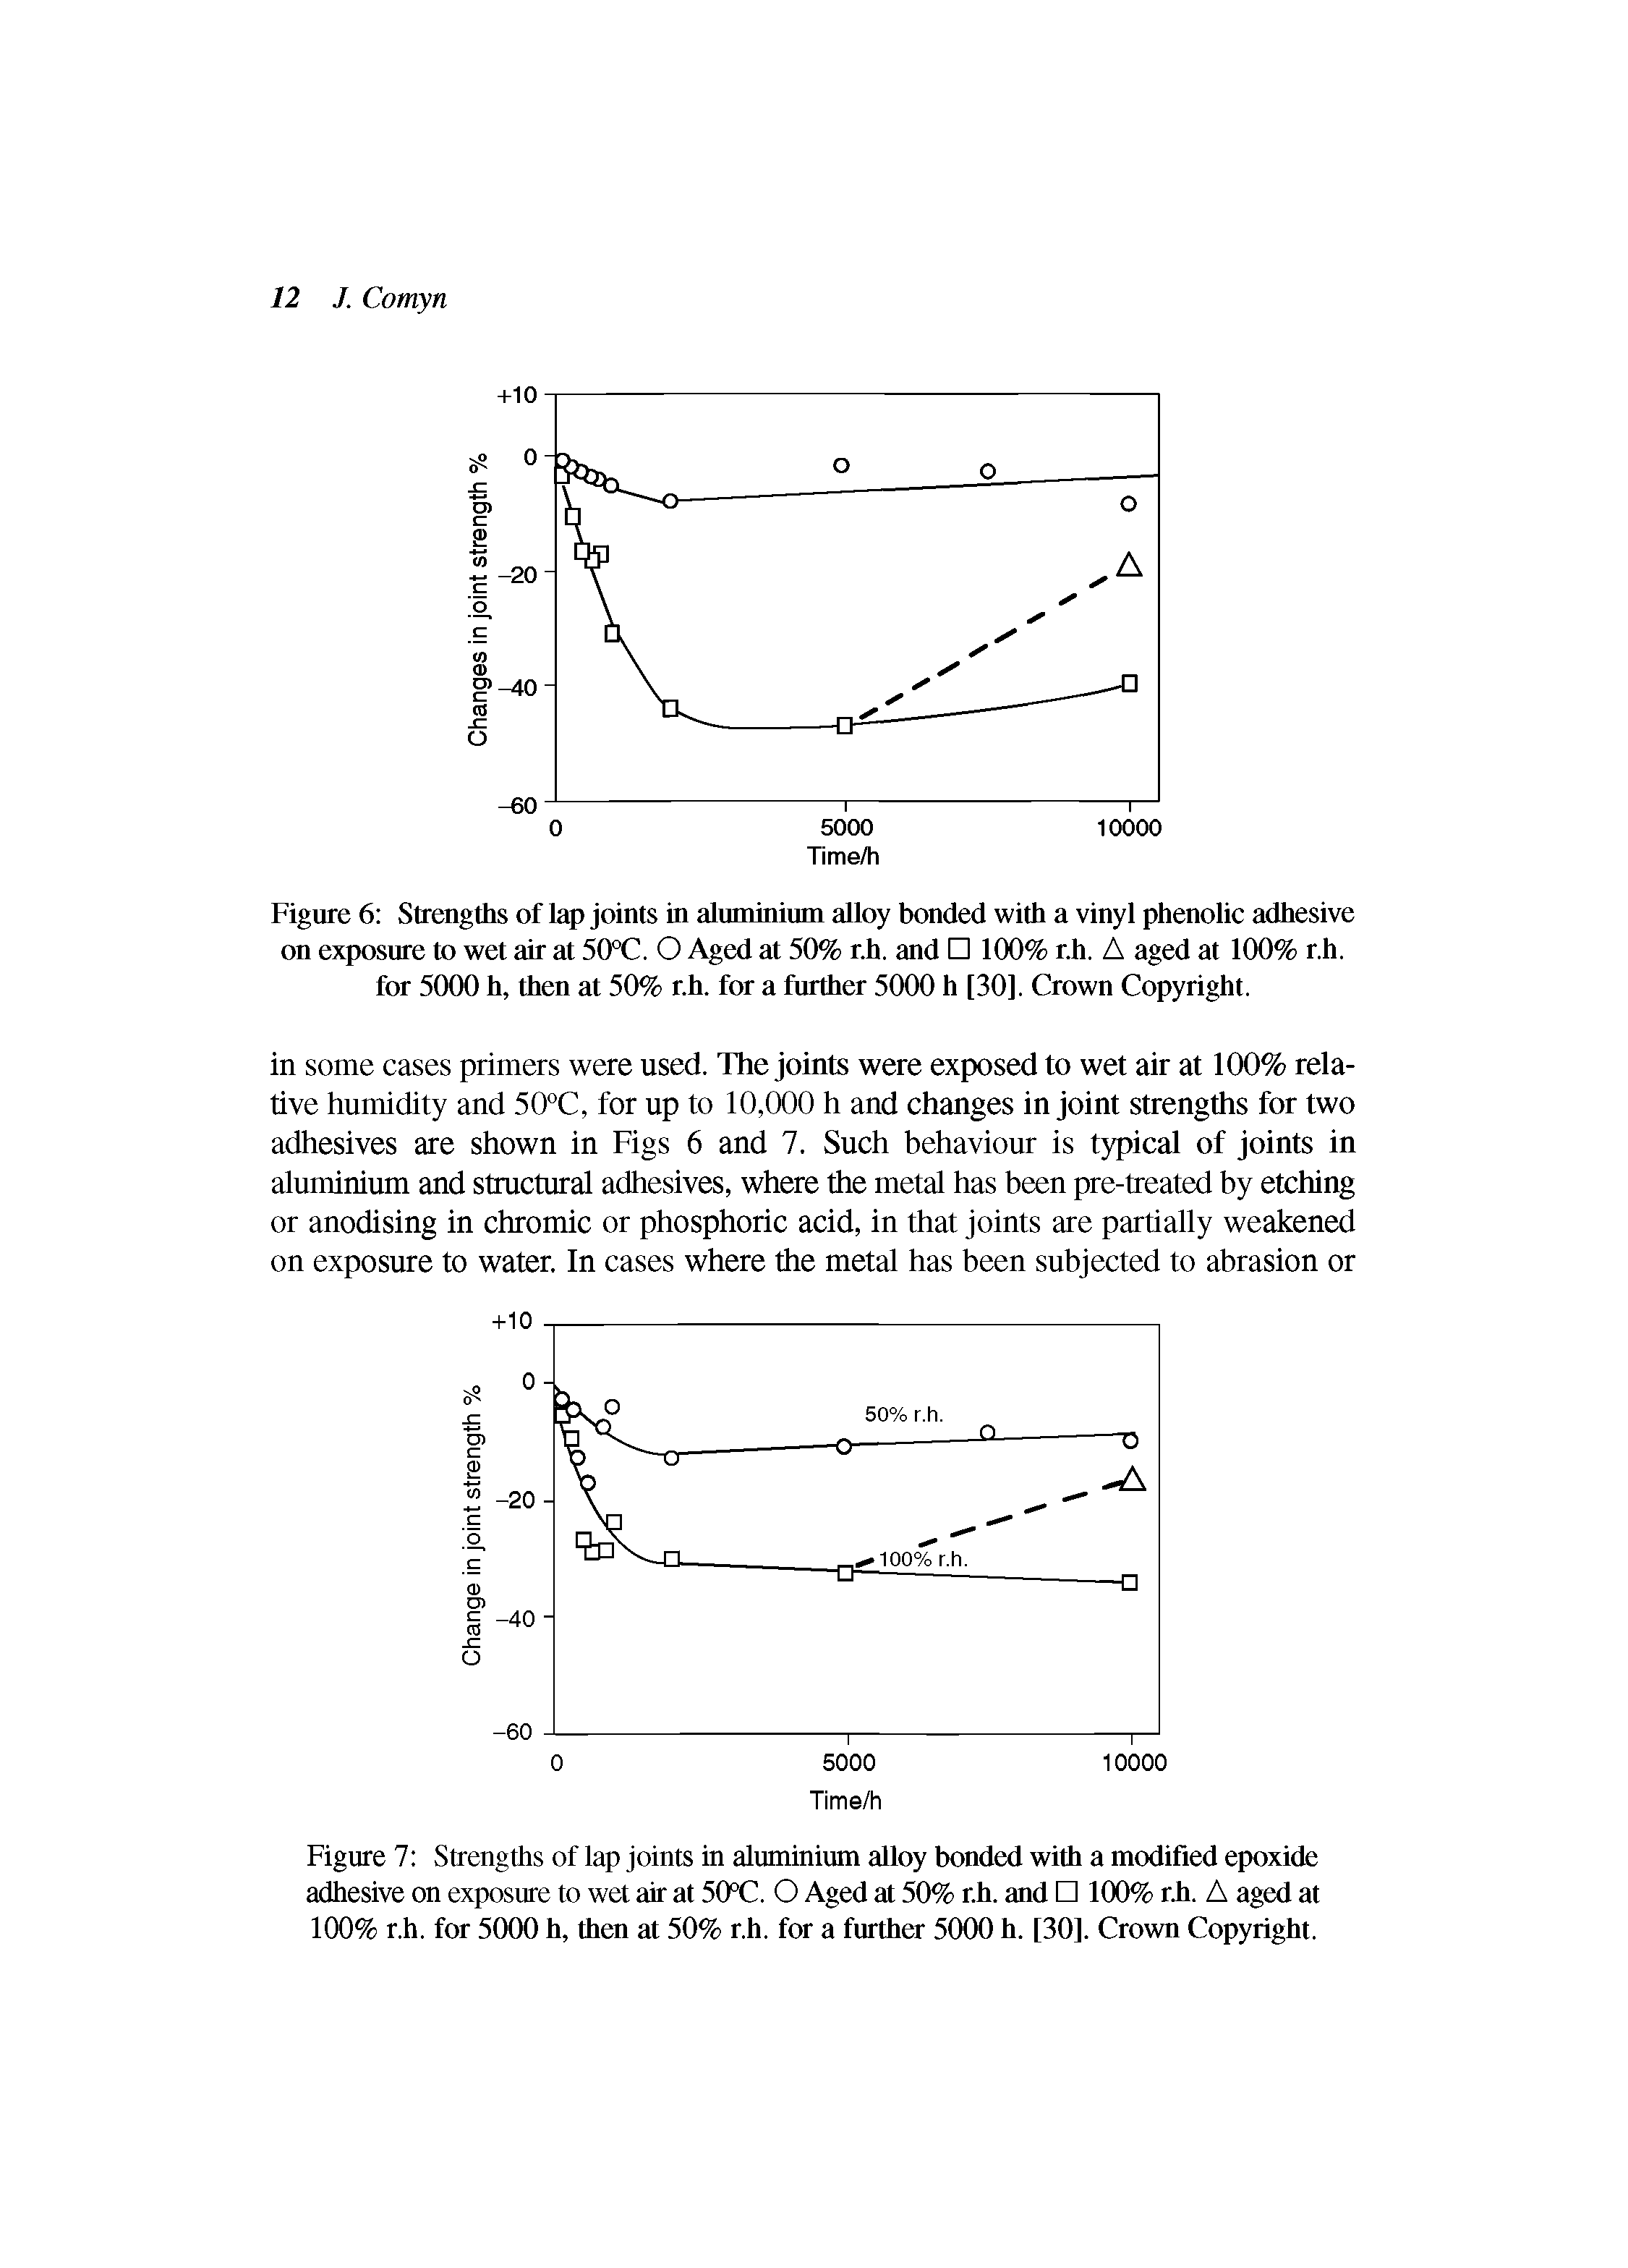 Figure 6 Strenglhs of lap joints in aluminium alloy bonded with a vinyl phenolic adhesive on exposure to wet air at 50°C. O Aged at 50% r.h. and 100% rJi. A aged at 100% r.h. for 5000 h, then at 50% r.h. for a further 5000 h [30]. Crown Copyright.